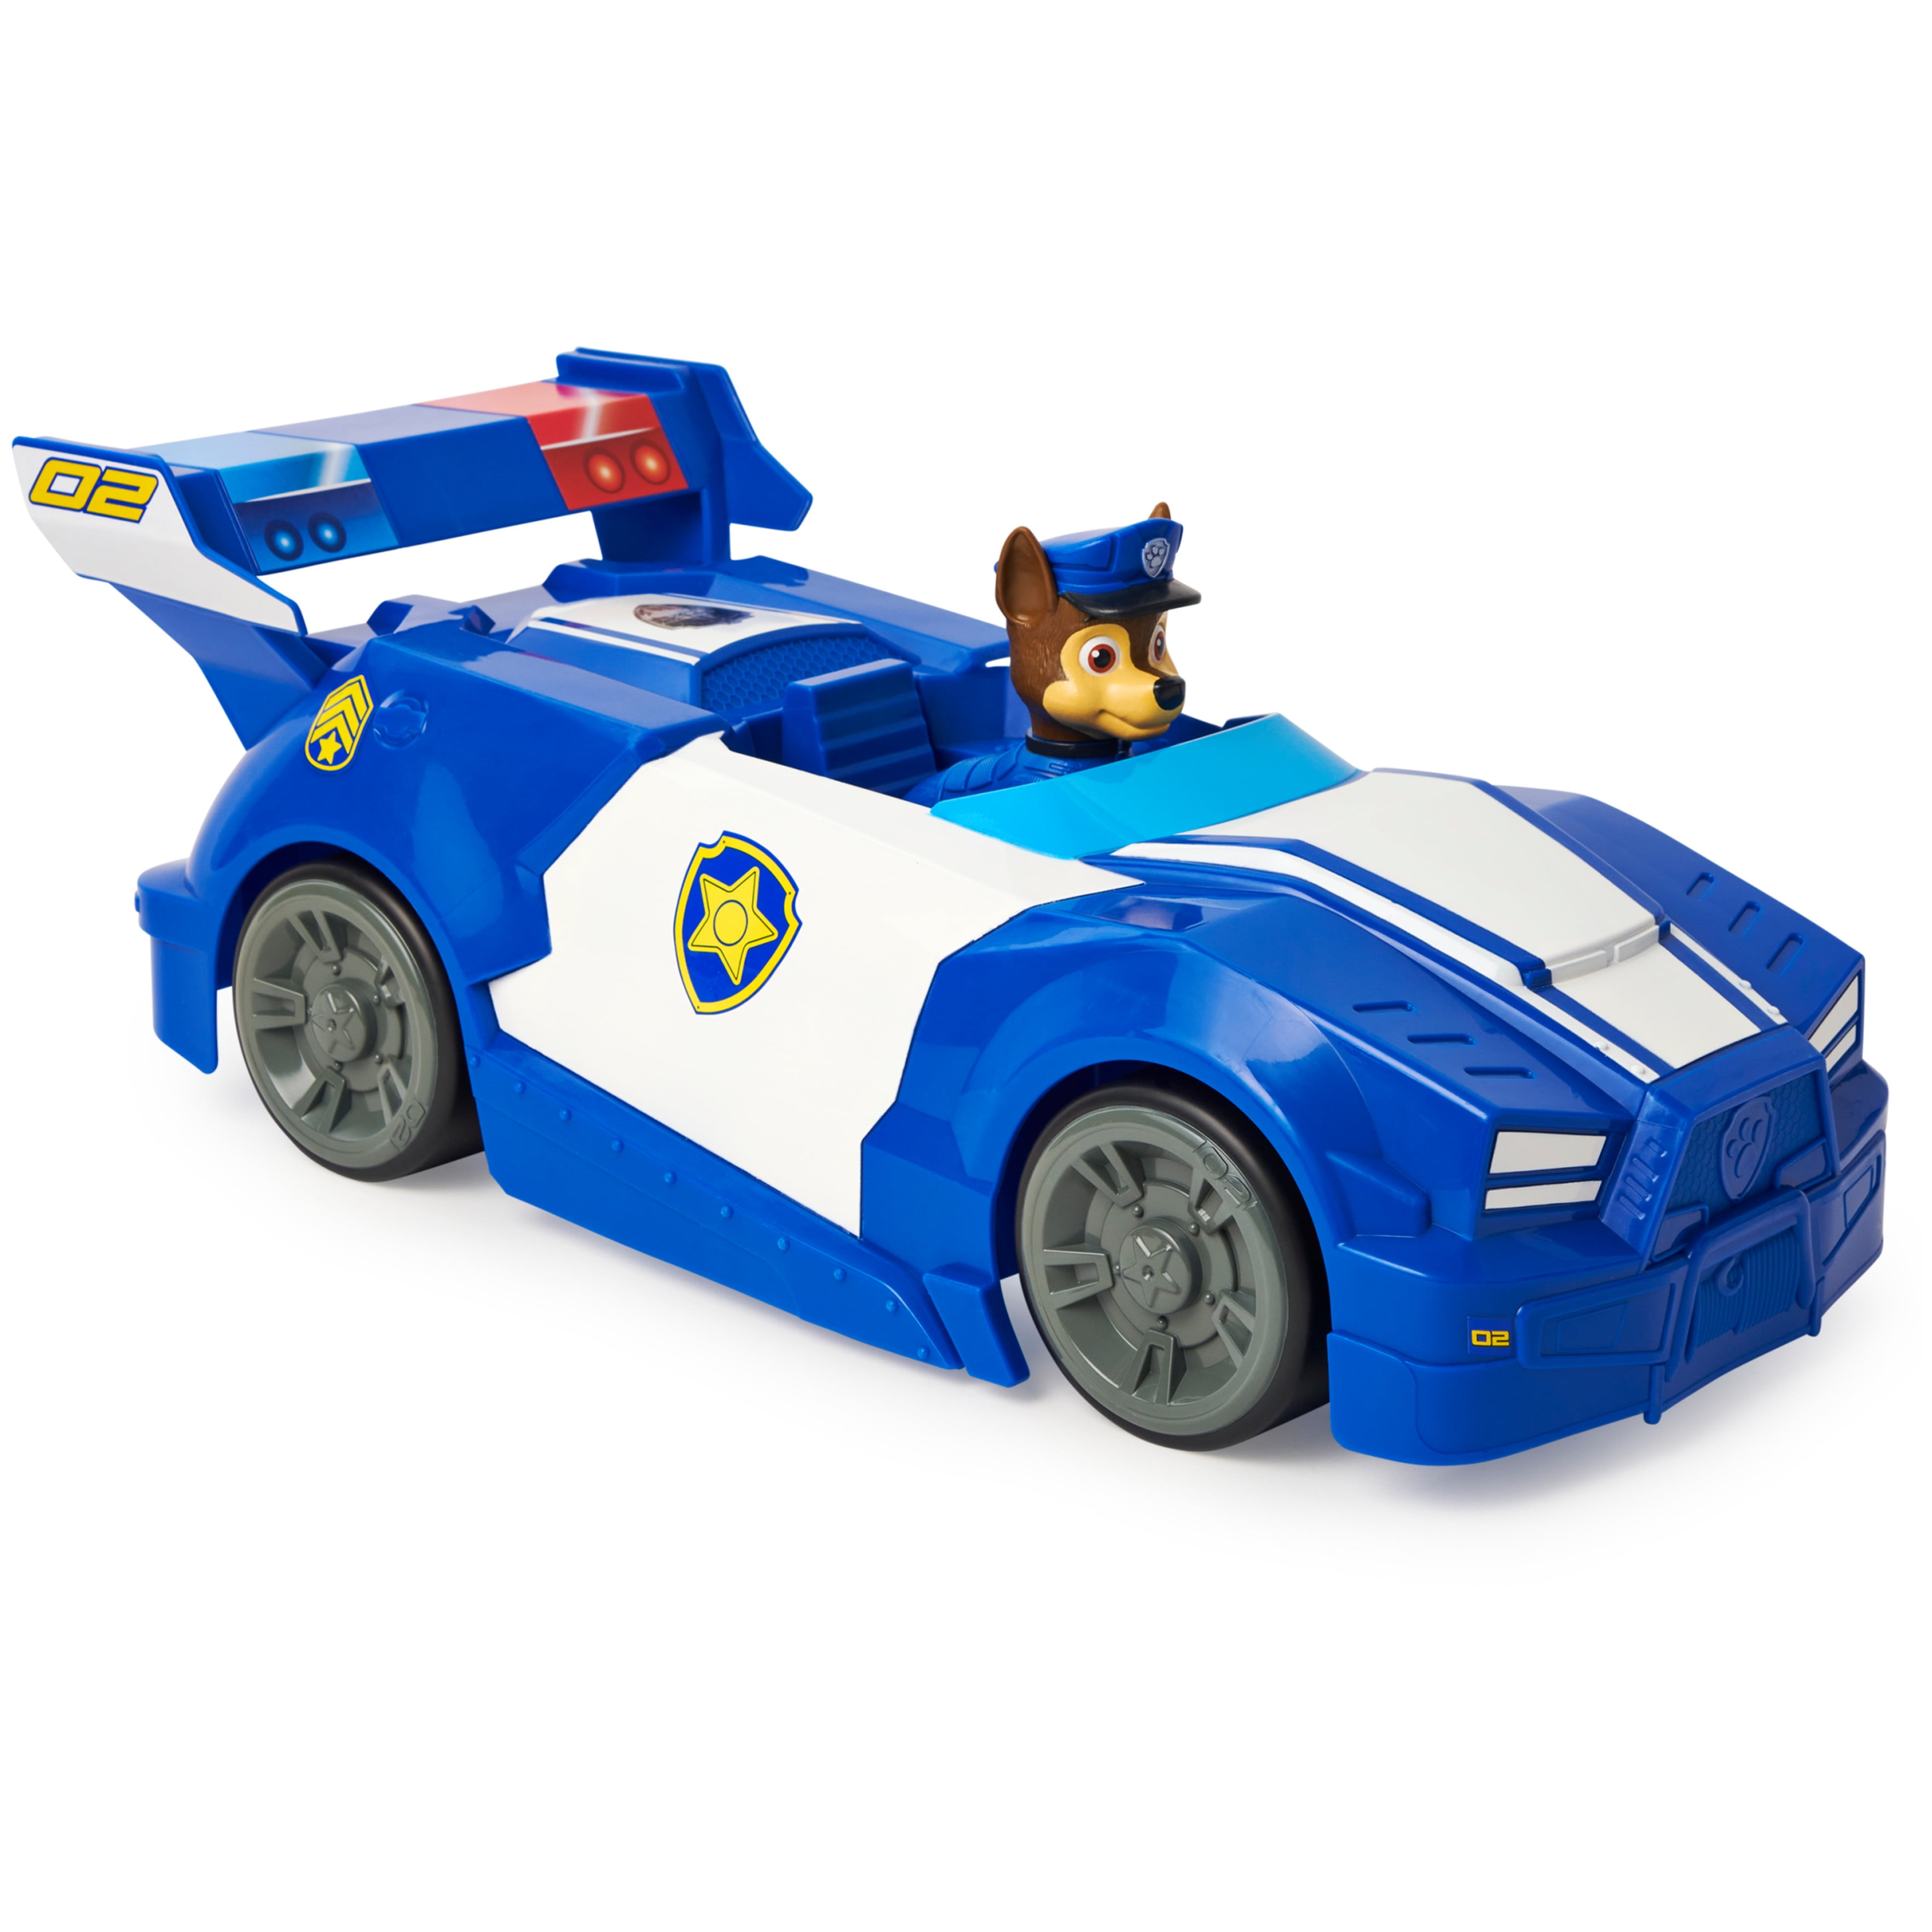 Nickelodeon Paw Patrol Megamat Chase Vehicle Included Free Shipping 